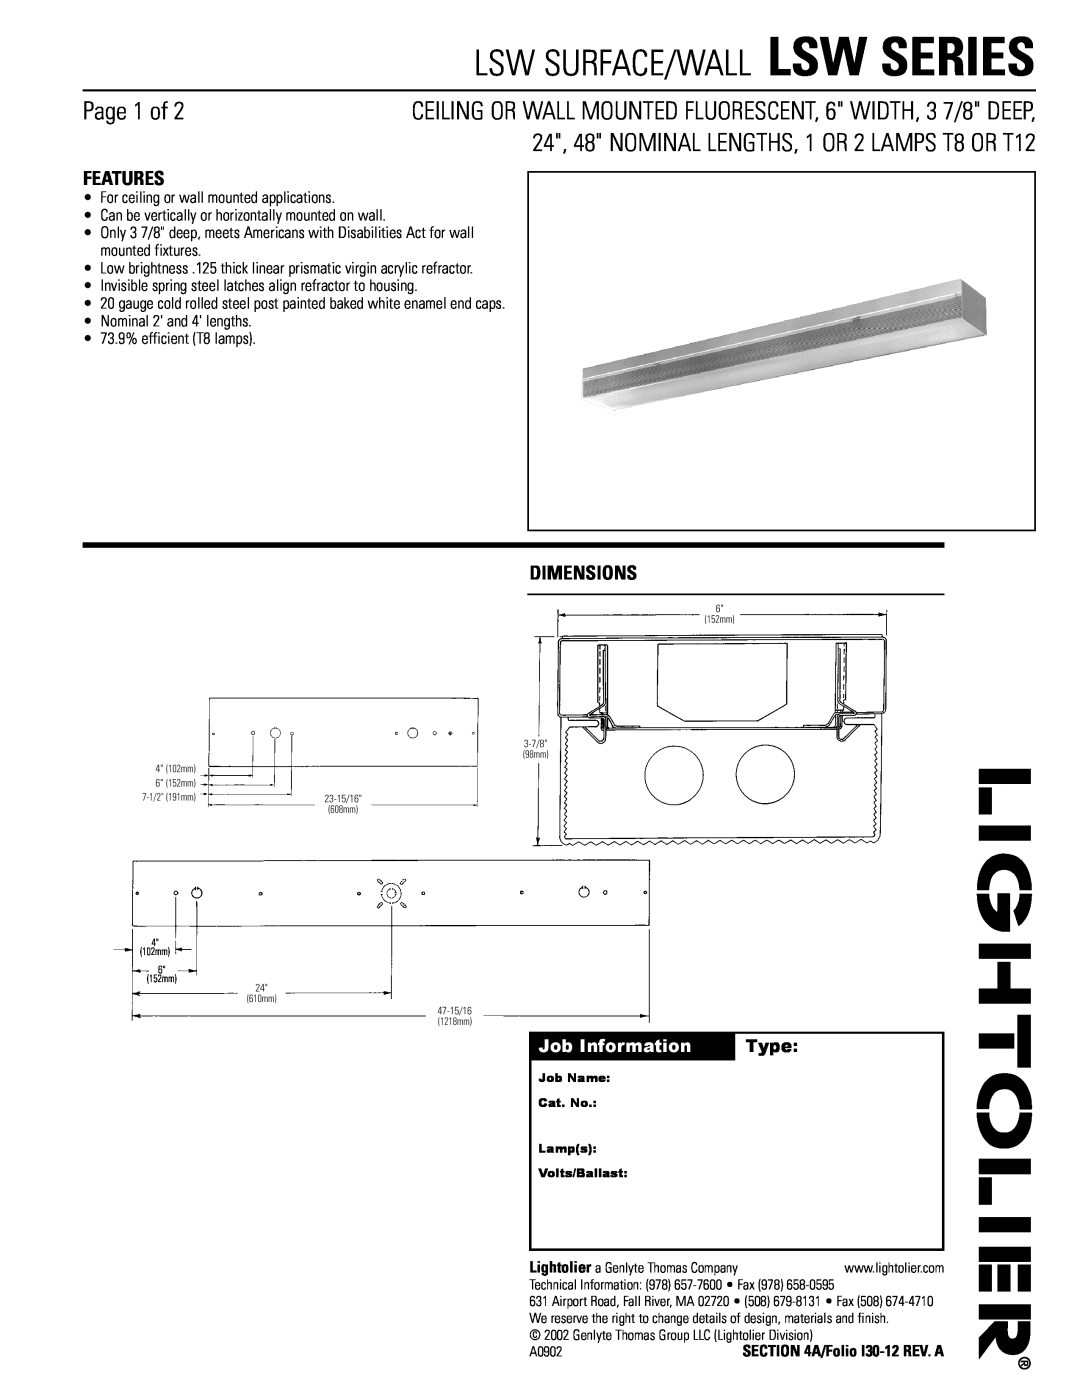 Lightolier LSW4232120SO dimensions Page 1 of, 24, 48 NOMINAL LENGTHS, 1 OR 2 LAMPS, Features, Dimensions, 7/8 DEEP, Type 